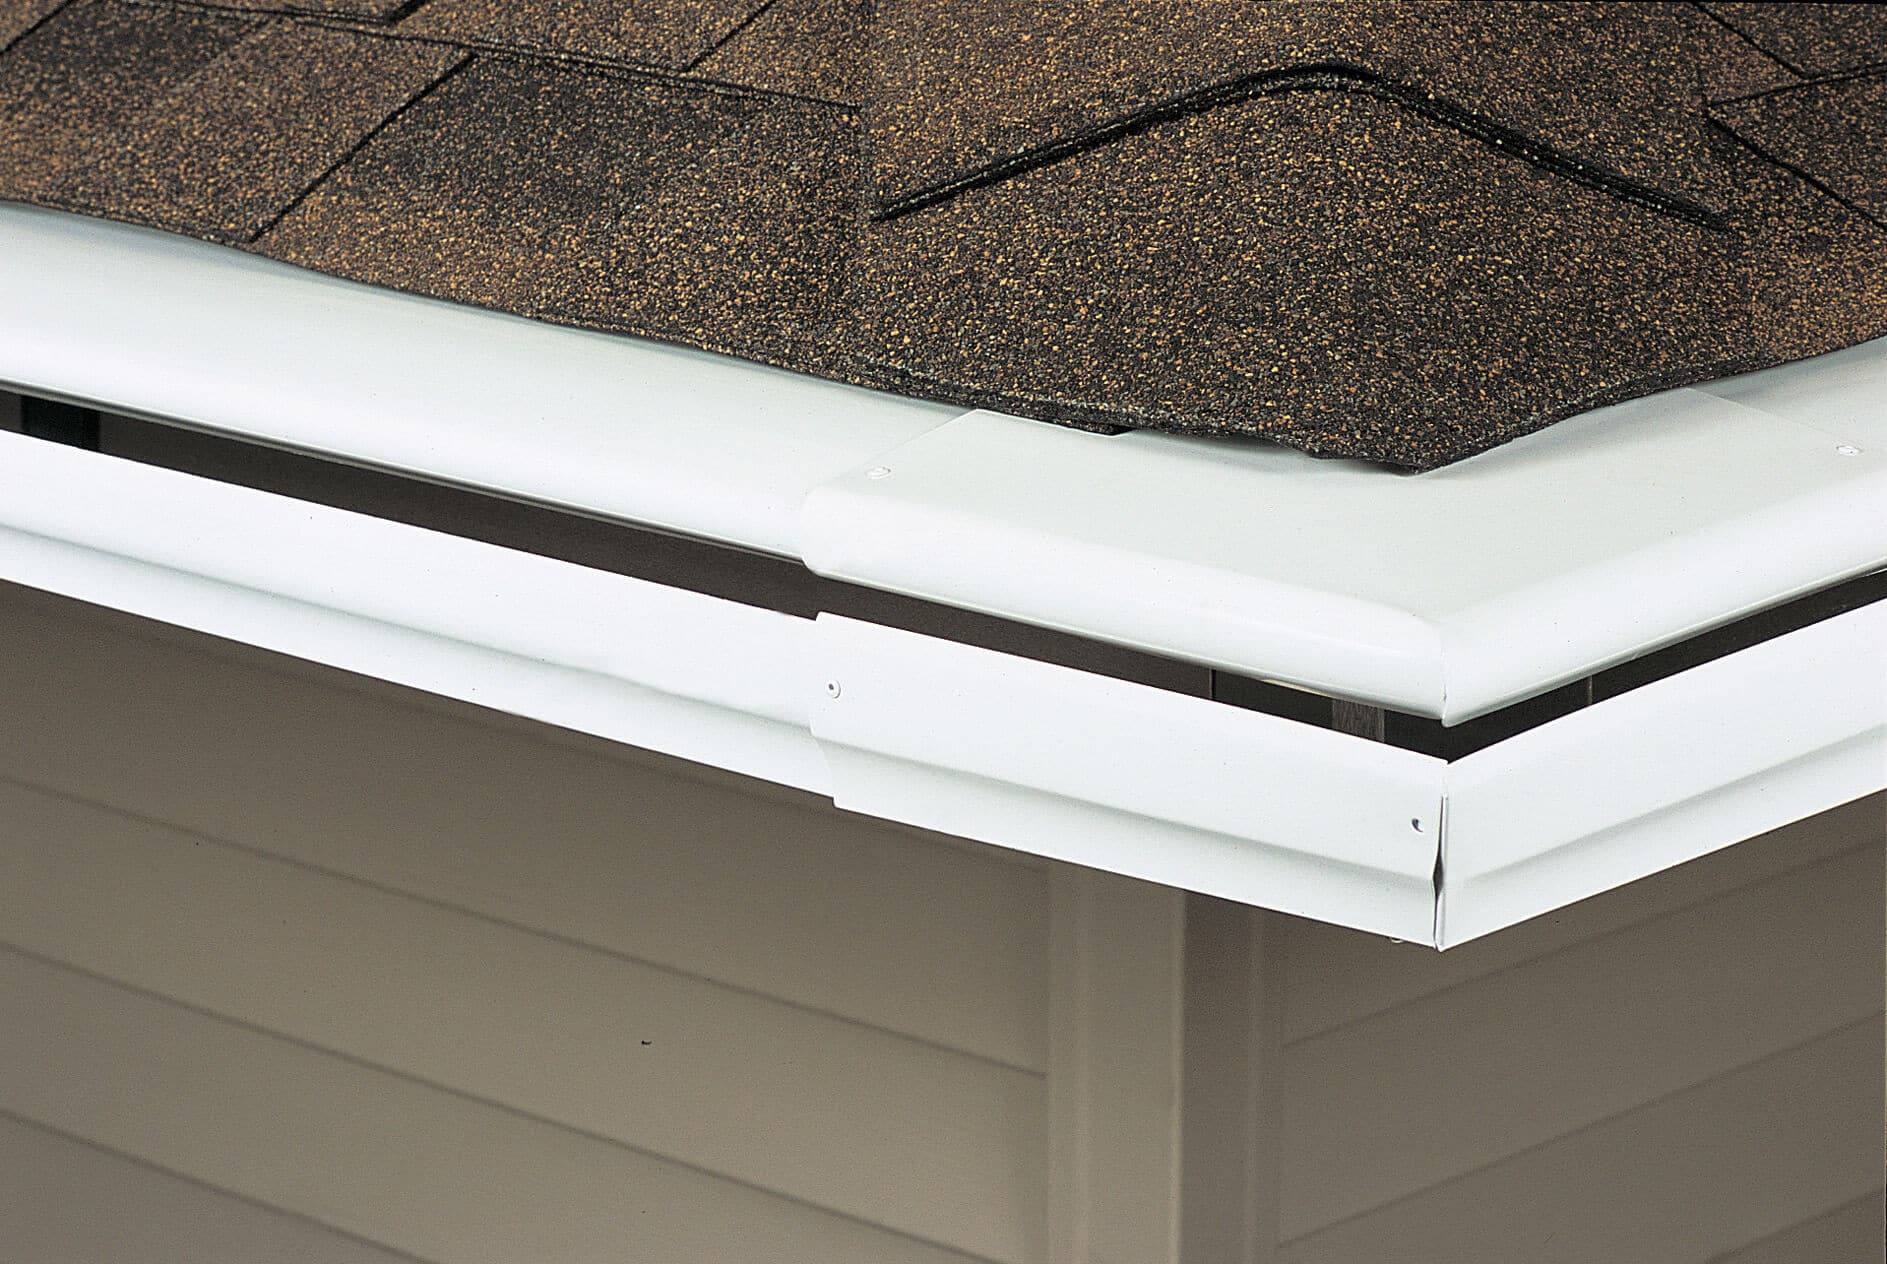 Picture of LeafGuard® Brand Gutters on the corner of a roof.